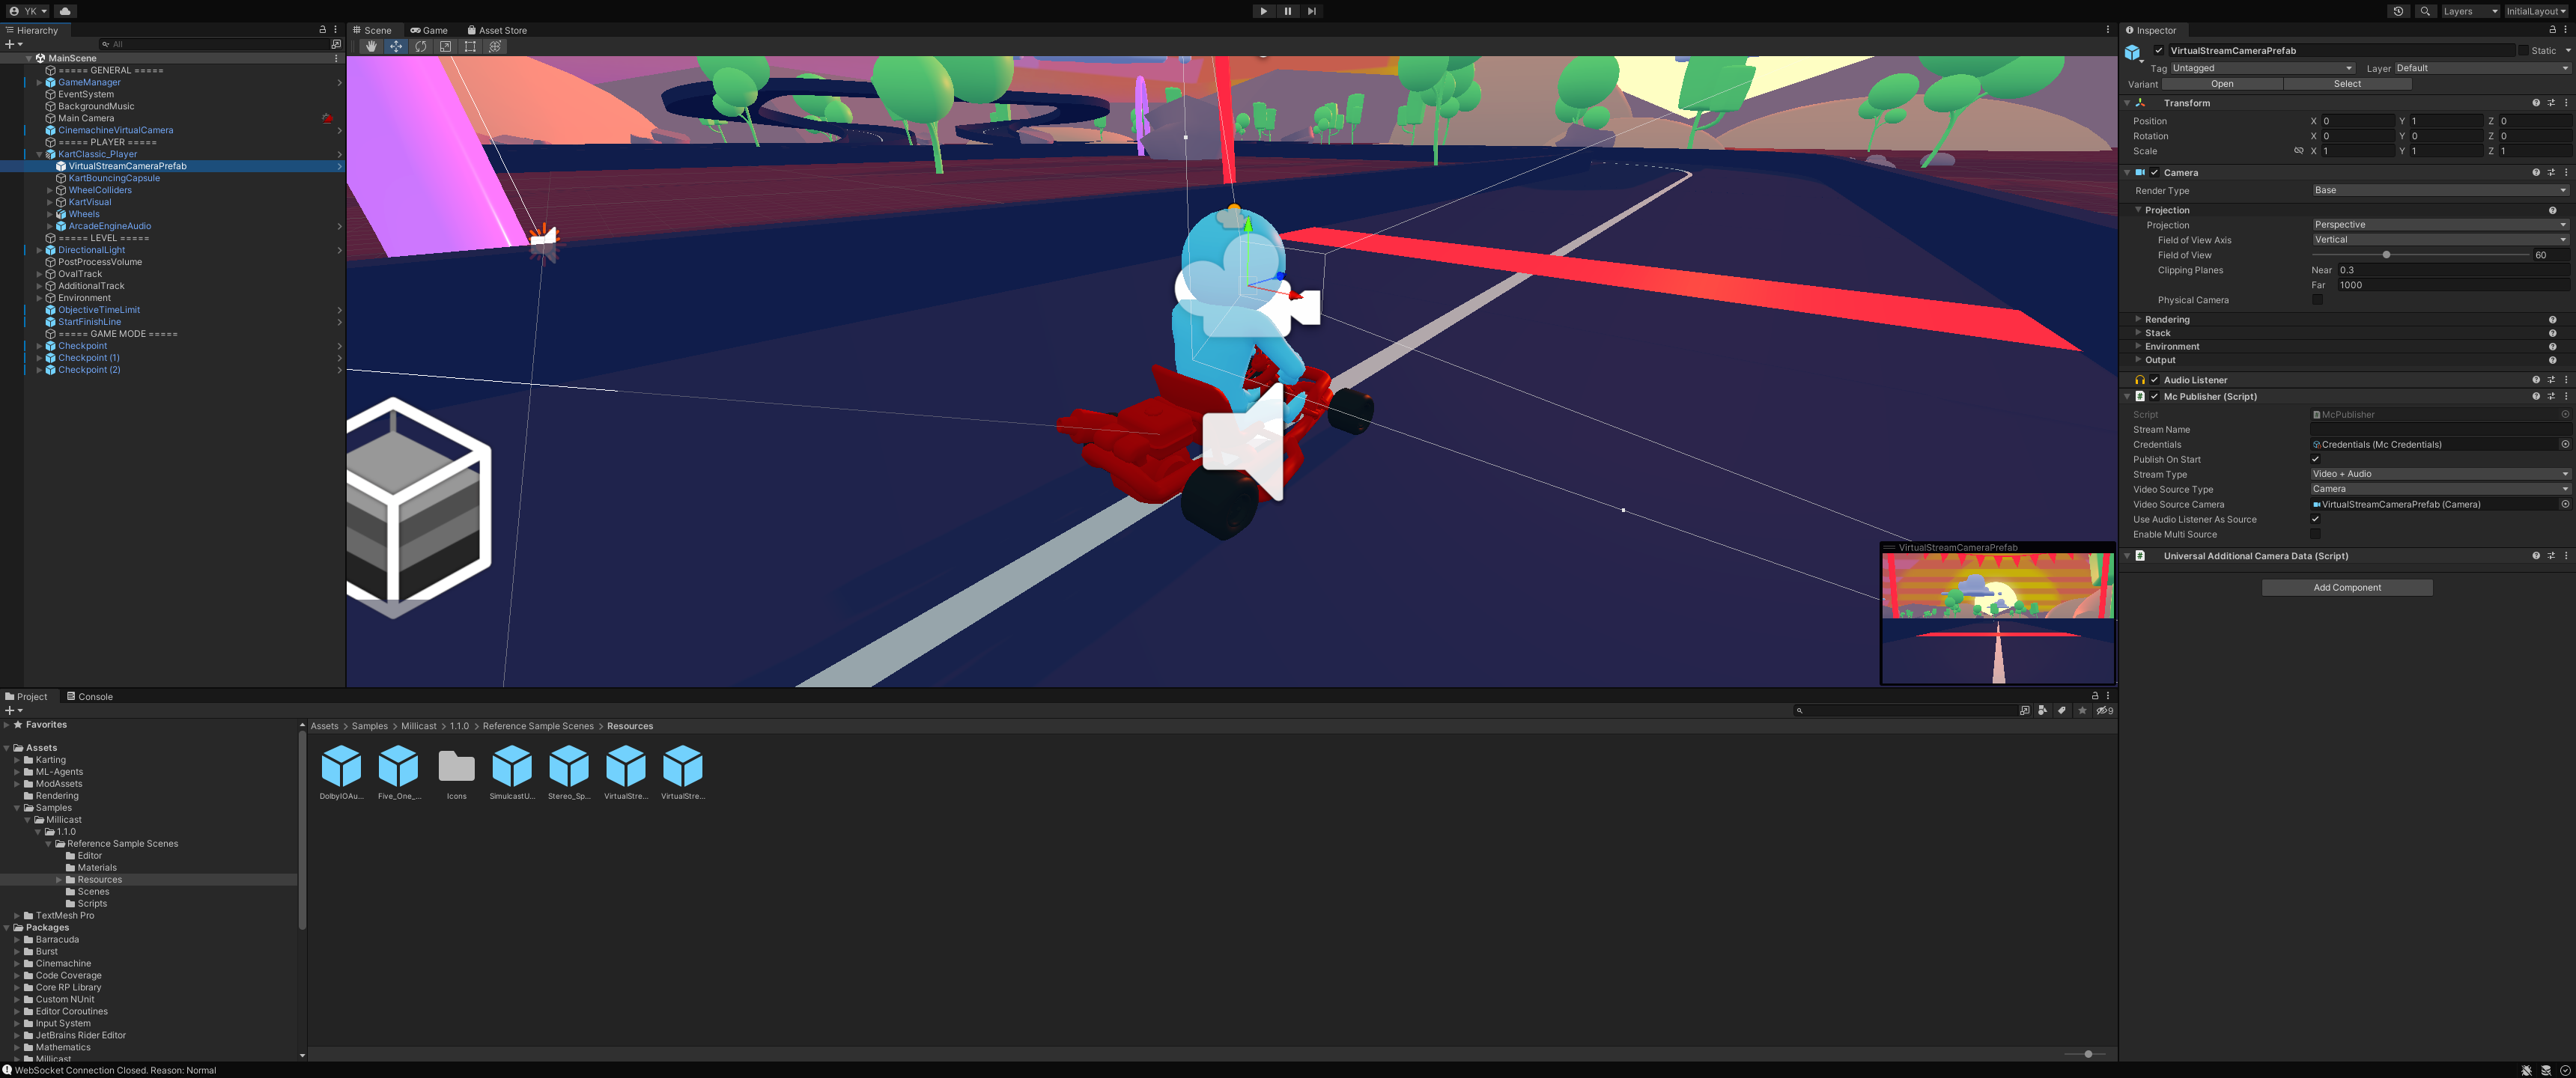 Notice the `VirtualStreamCameraPrefab` is showing the road in-front of the player.